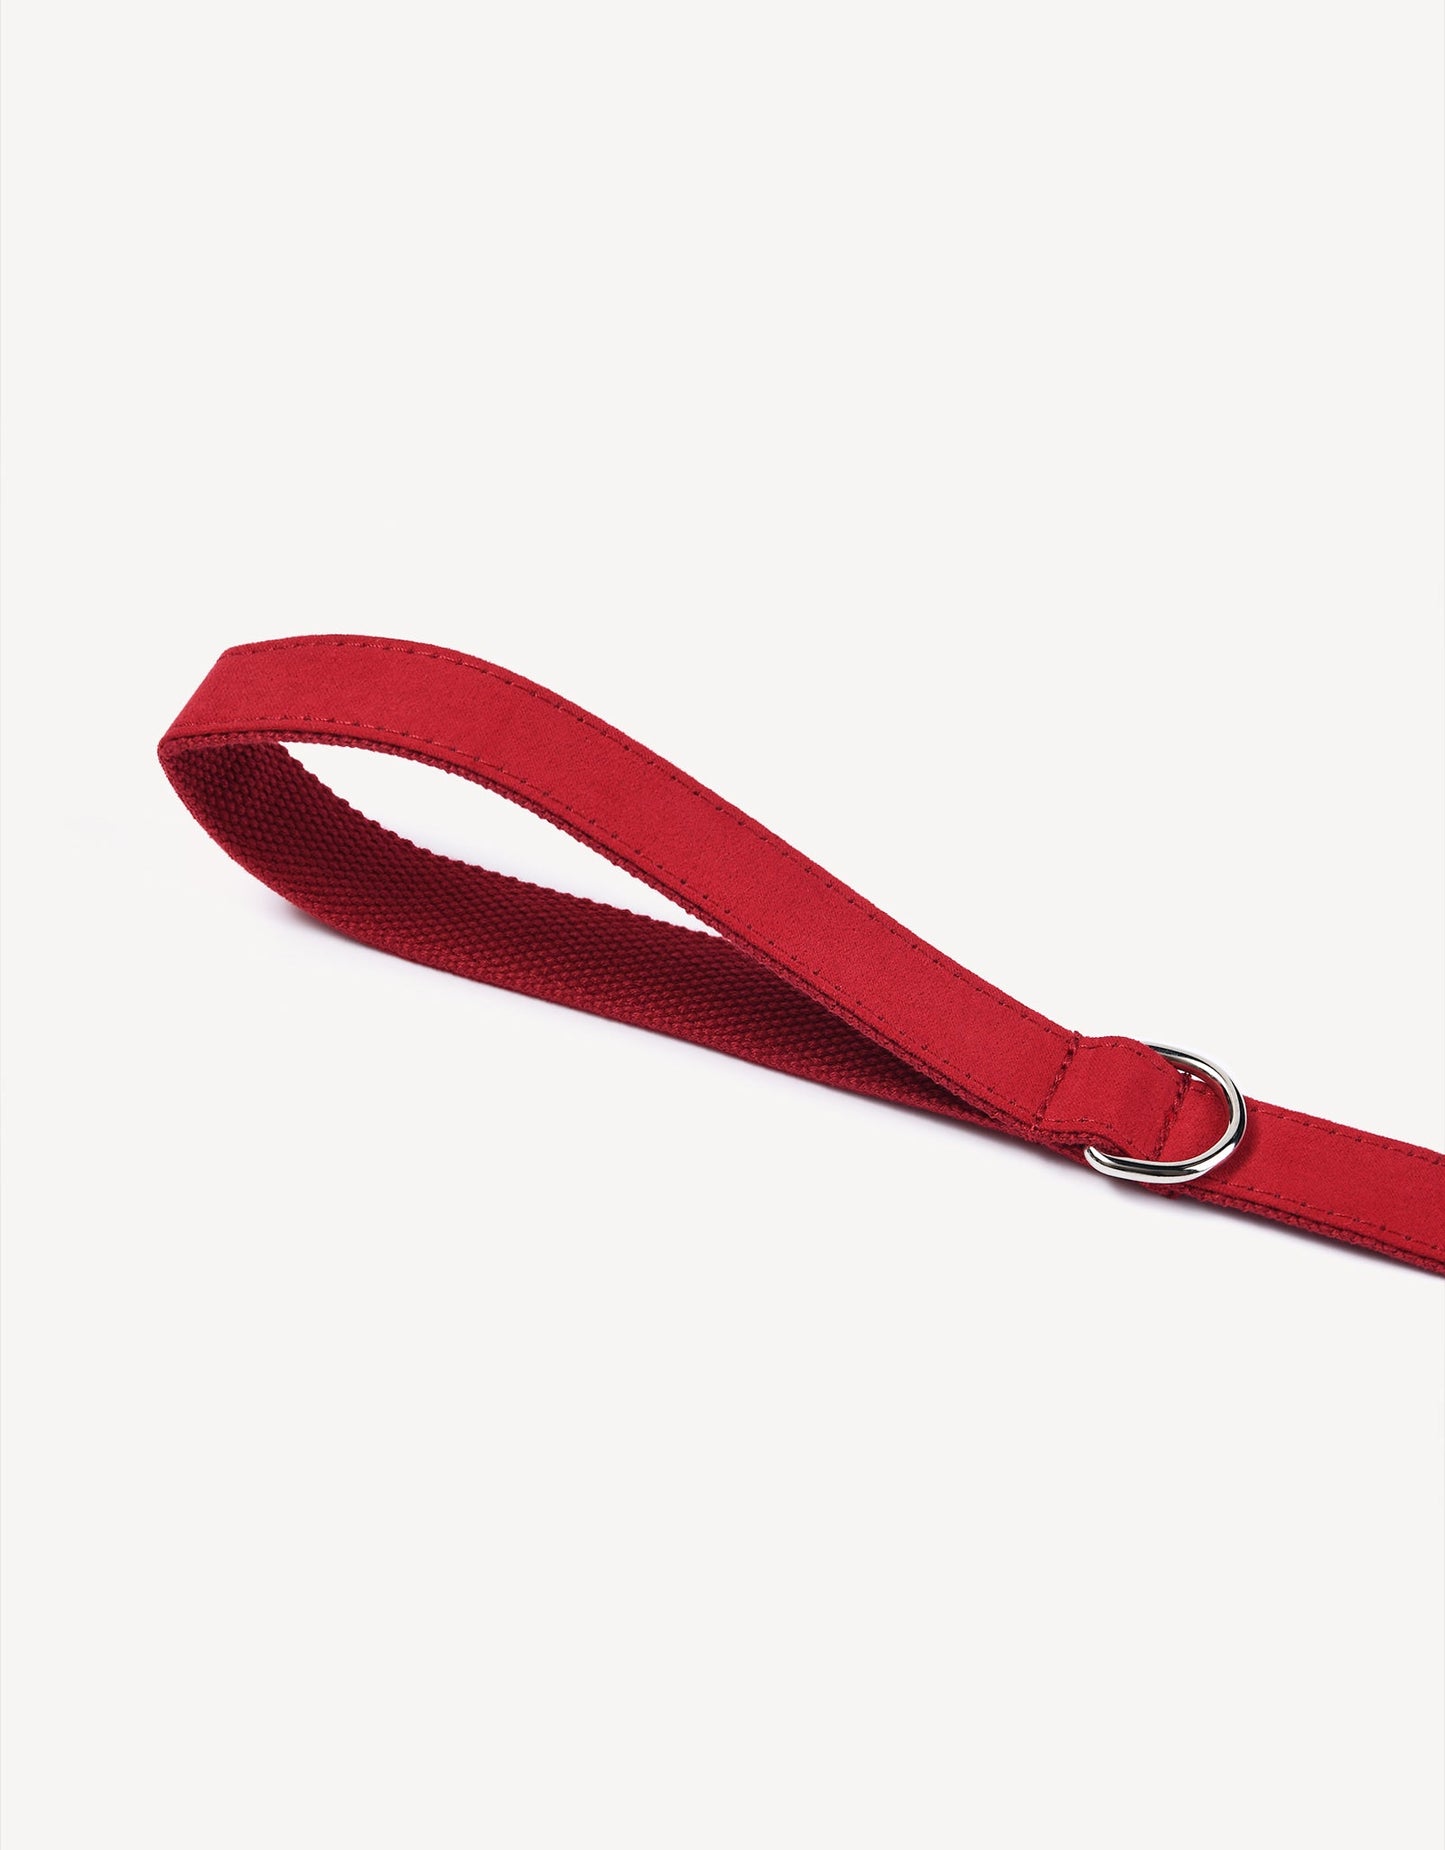 royal luxe dog leash - ruby red